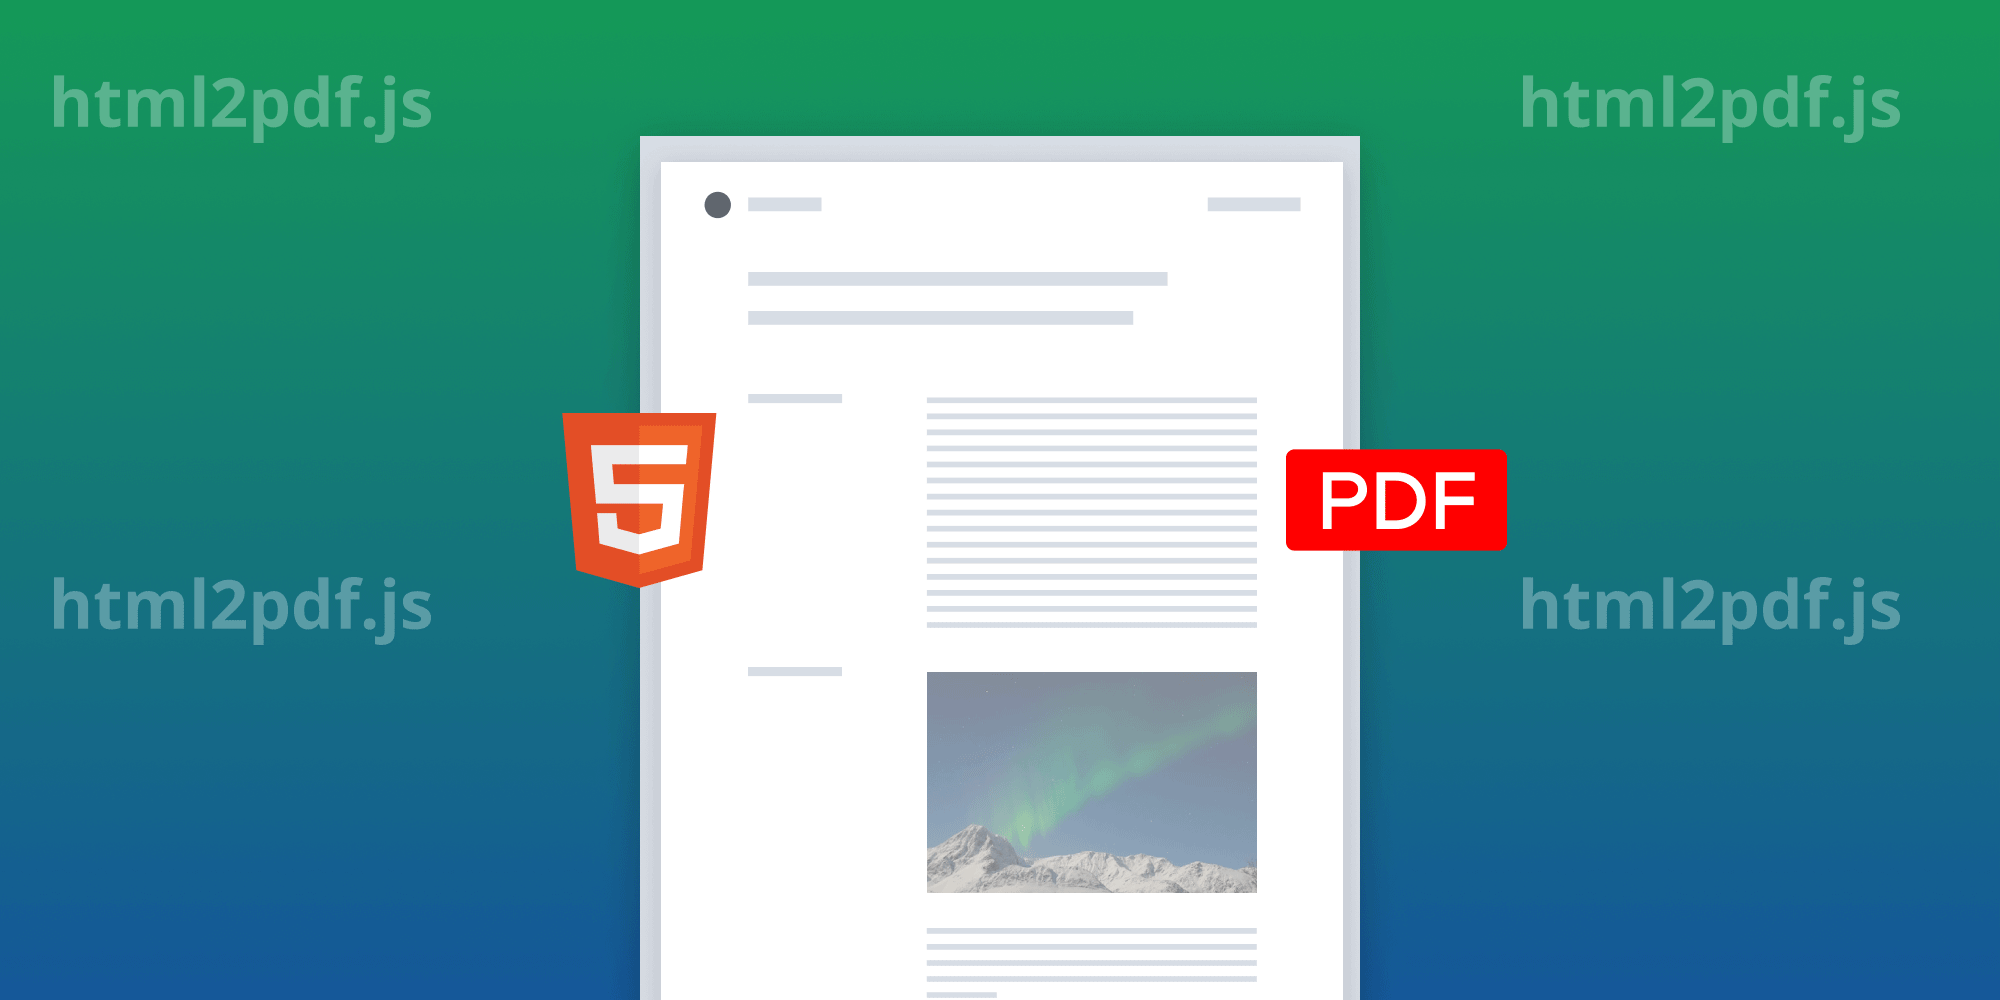 Illustration: How to Convert HTML to PDF Using html2pdf